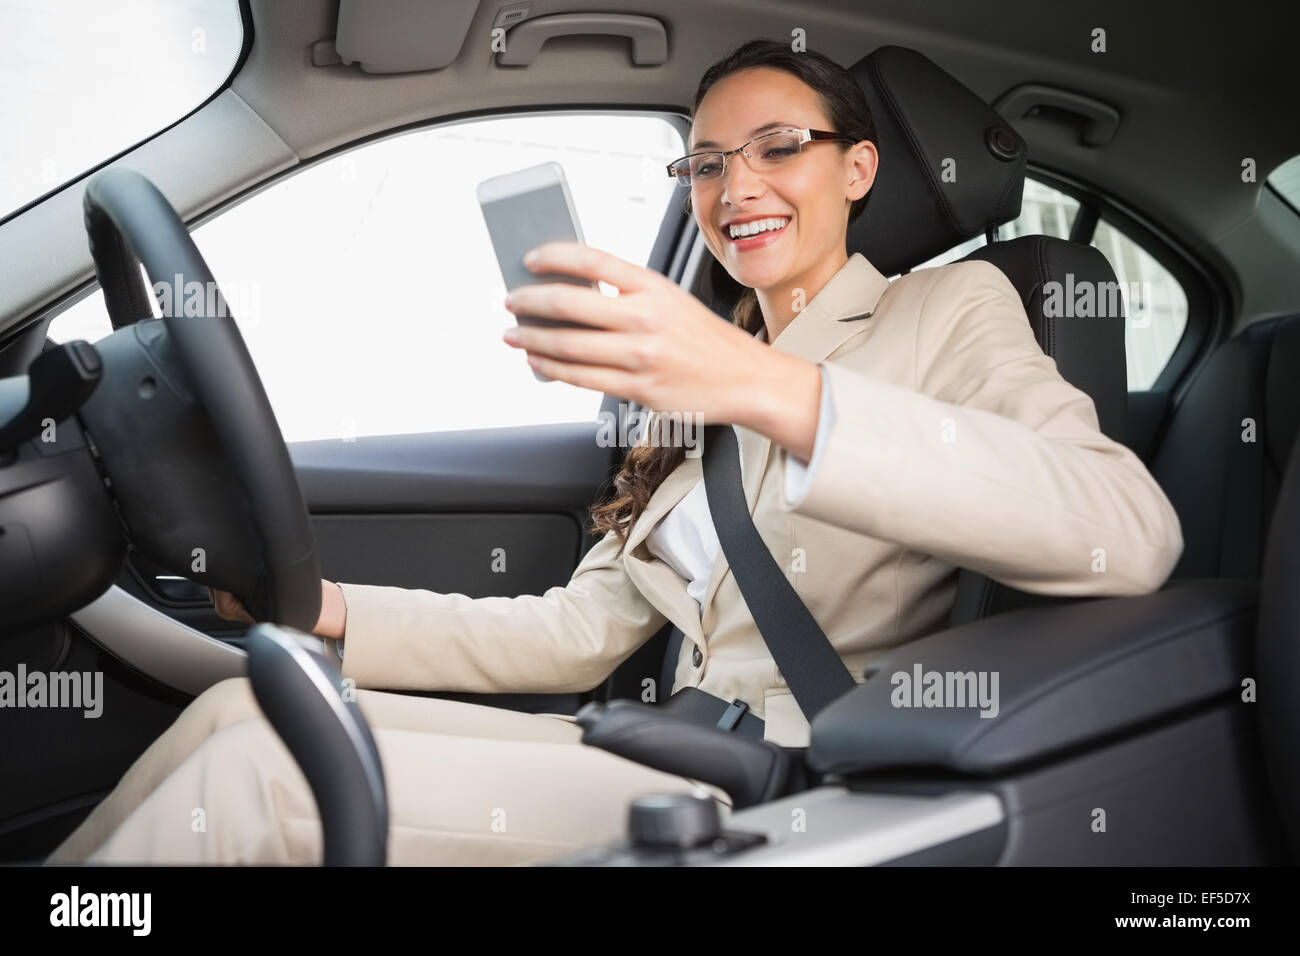 Smiling businesswoman sending a text message Stock Photo